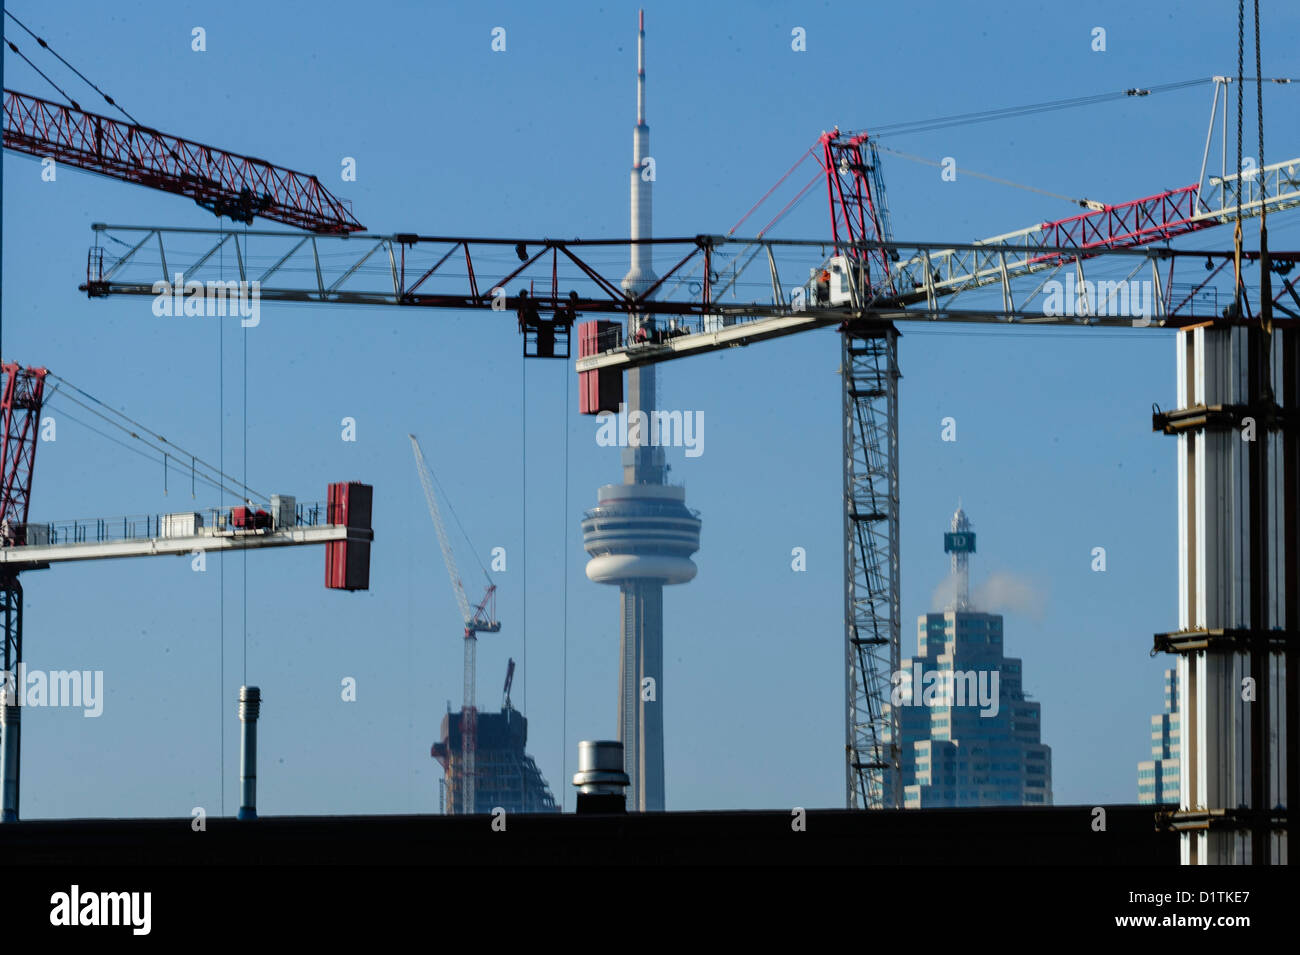 Toronto is preparing to host the 2015 Pan American/Parapan American Games with the construction of the athlete's village Stock Photo